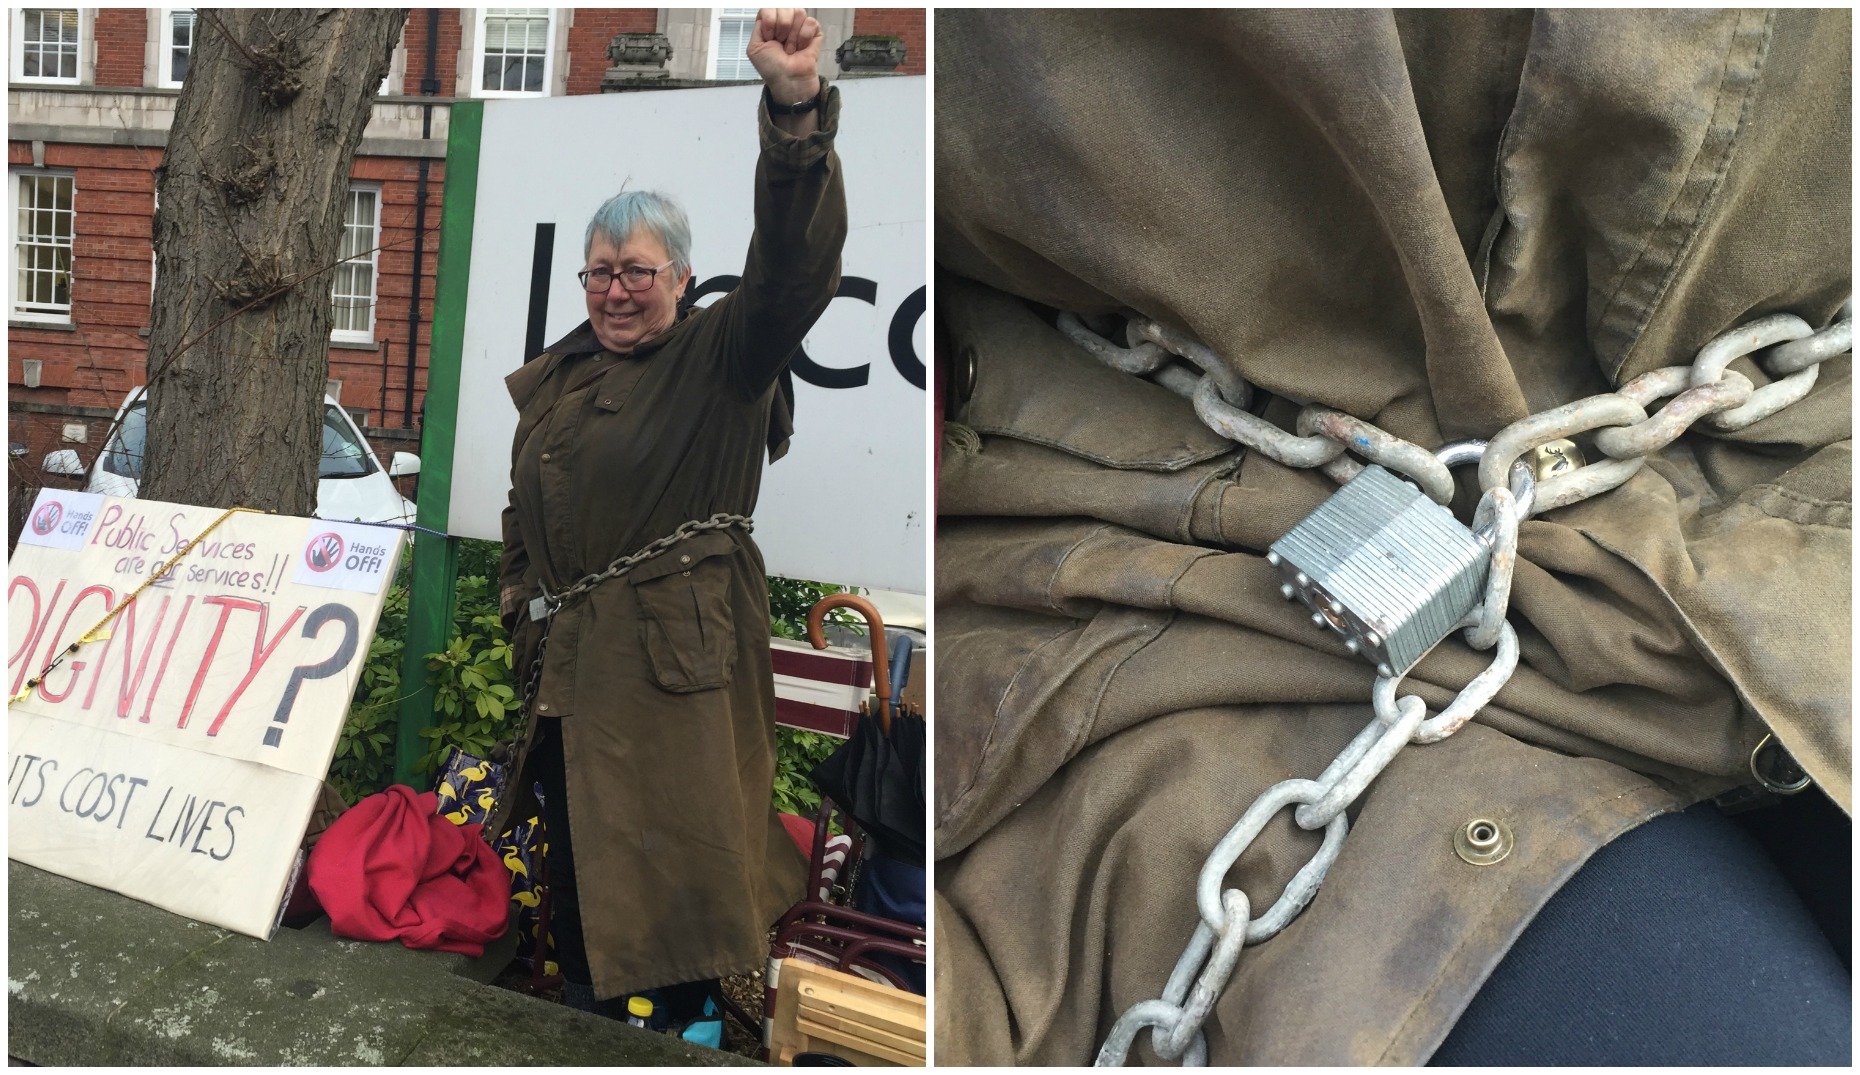 Elaine Smith chained her self to the Lincolnshire County Council sign in order to get her message out. 